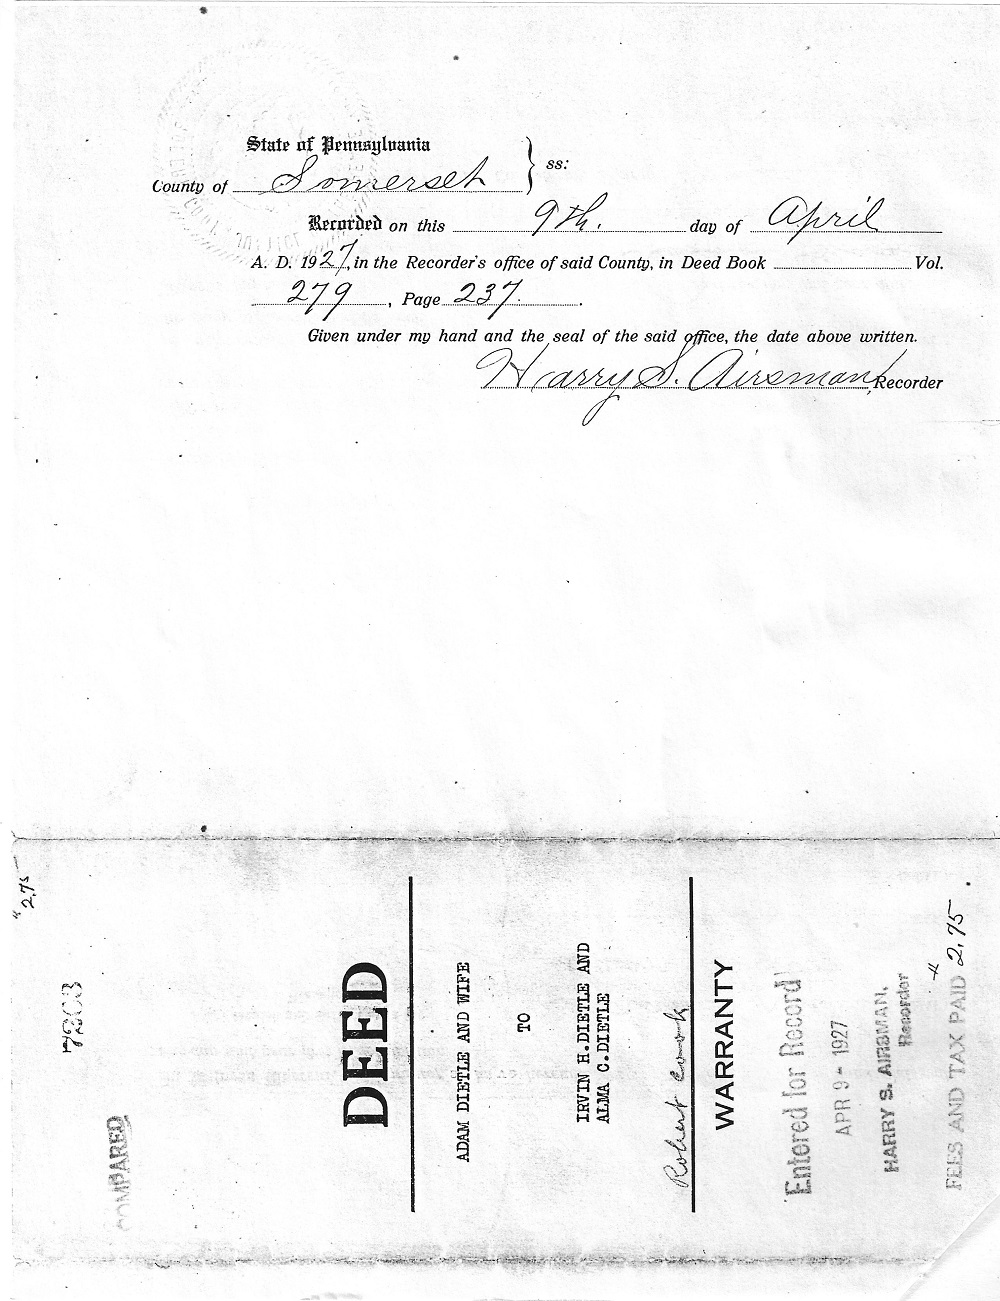 001- 1927 Somerset County deed to Irvin Henry Dietle.